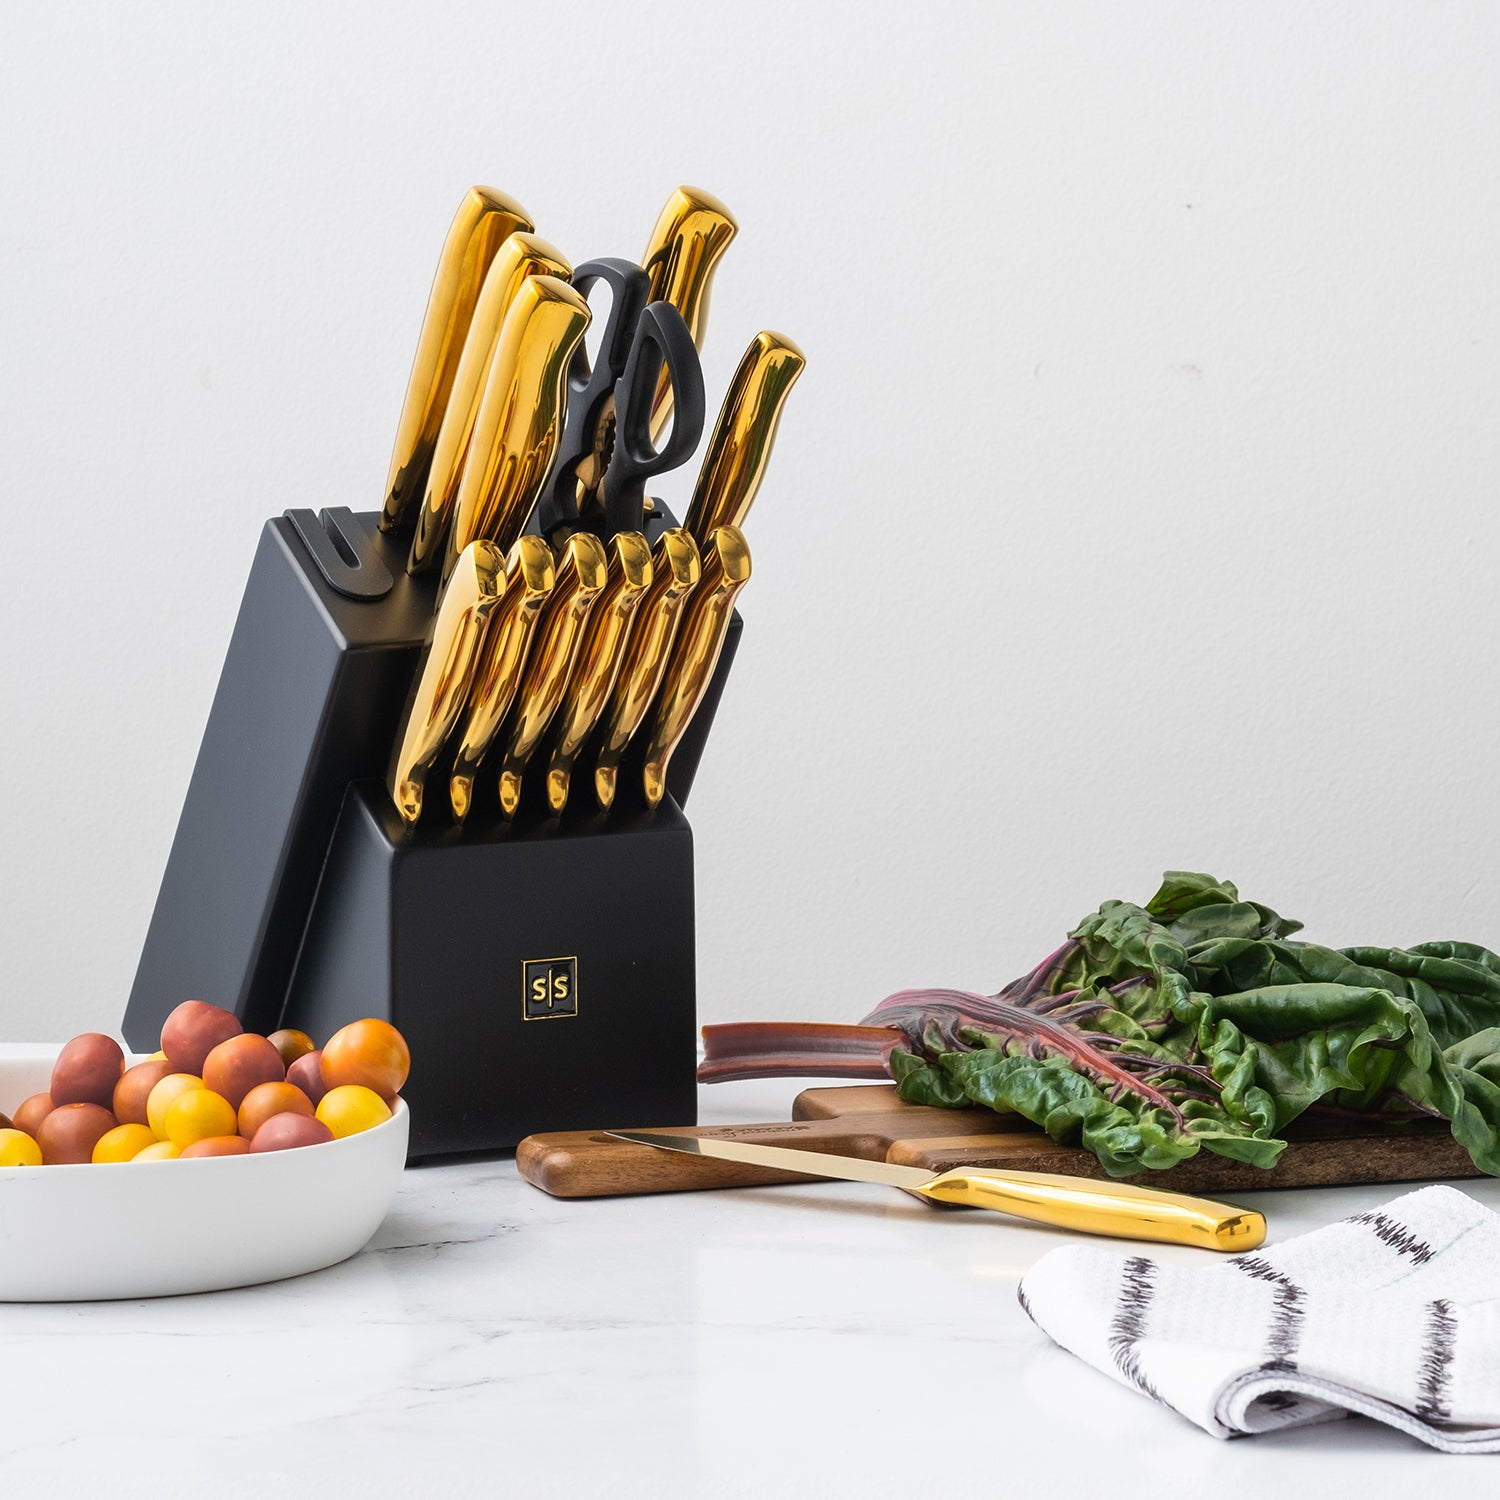  Black and Gold Knife Set with Block - 14 Piece Gold Knife Set  with Sharpener Includes Full Tang Gold Knives and Self Sharpening Knife  Block Set - Black and Gold Kitchen